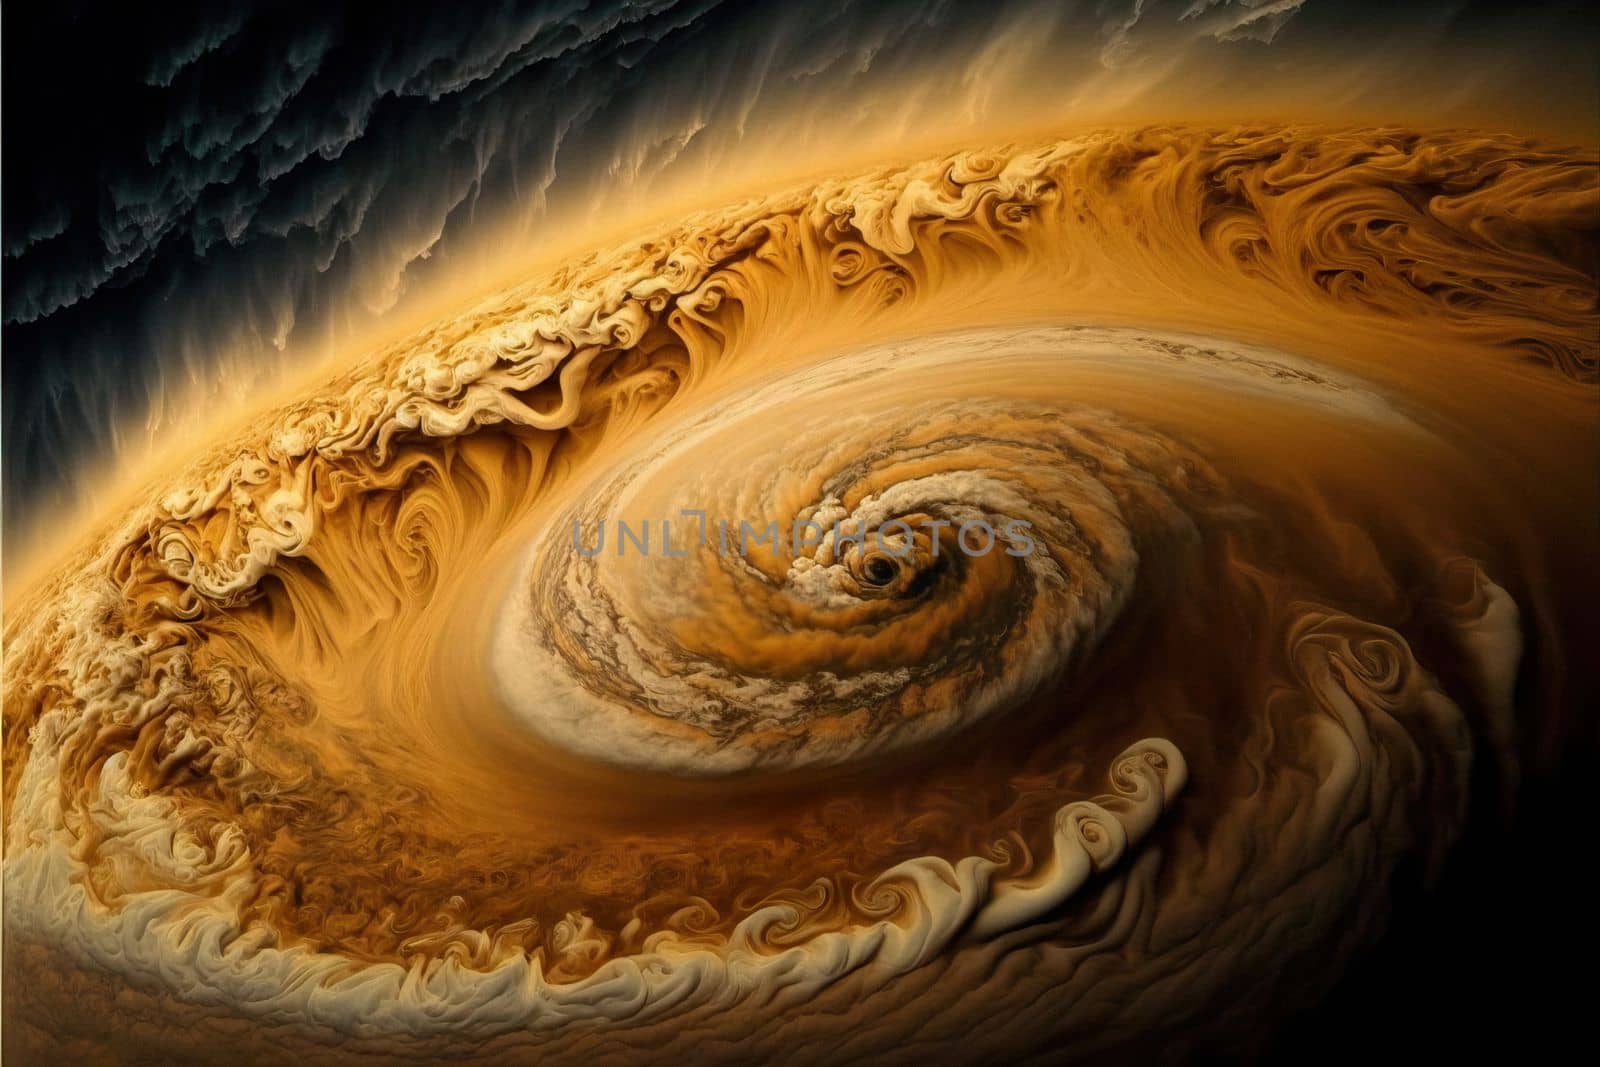 Closeup view of Jupiter with storm, that see when you notice the planets famed Great Red Spot a massive high pressure system, equivalent in size to three of our home planet. Image furnished by NASA. download image